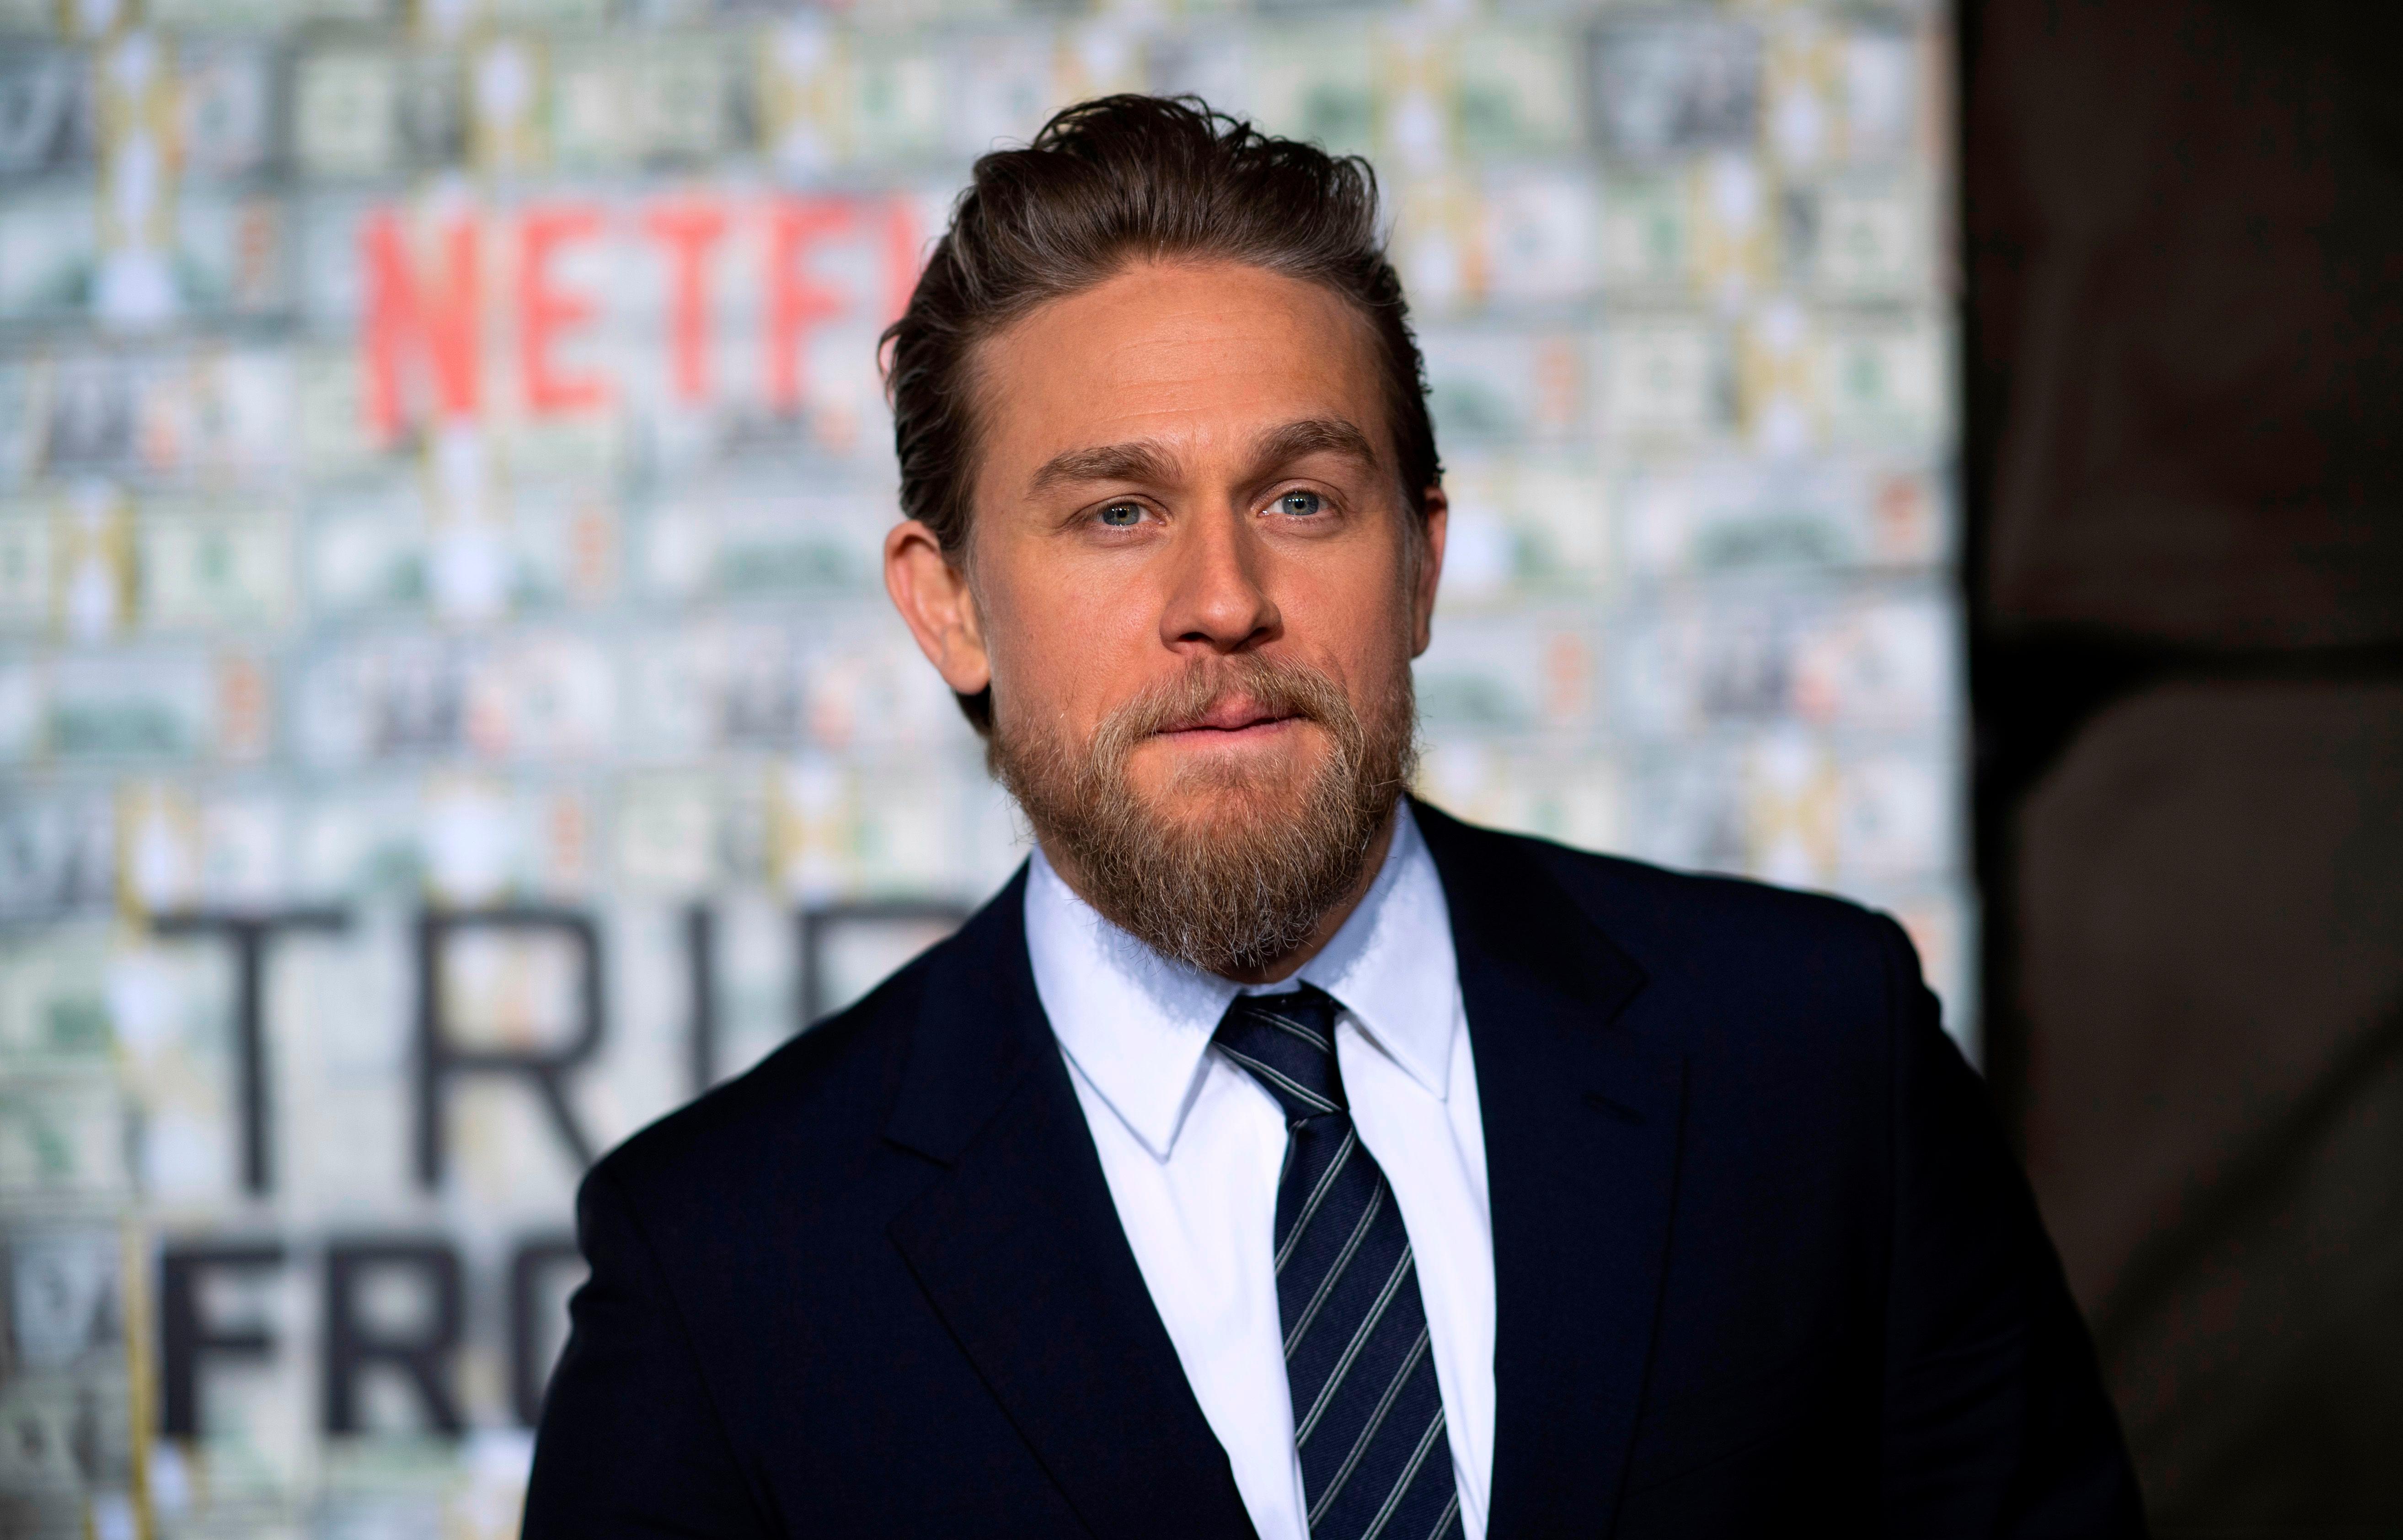 Charlie Hunnam’s New Film ‘The Gentlemen’ Gets Its Official Release Date